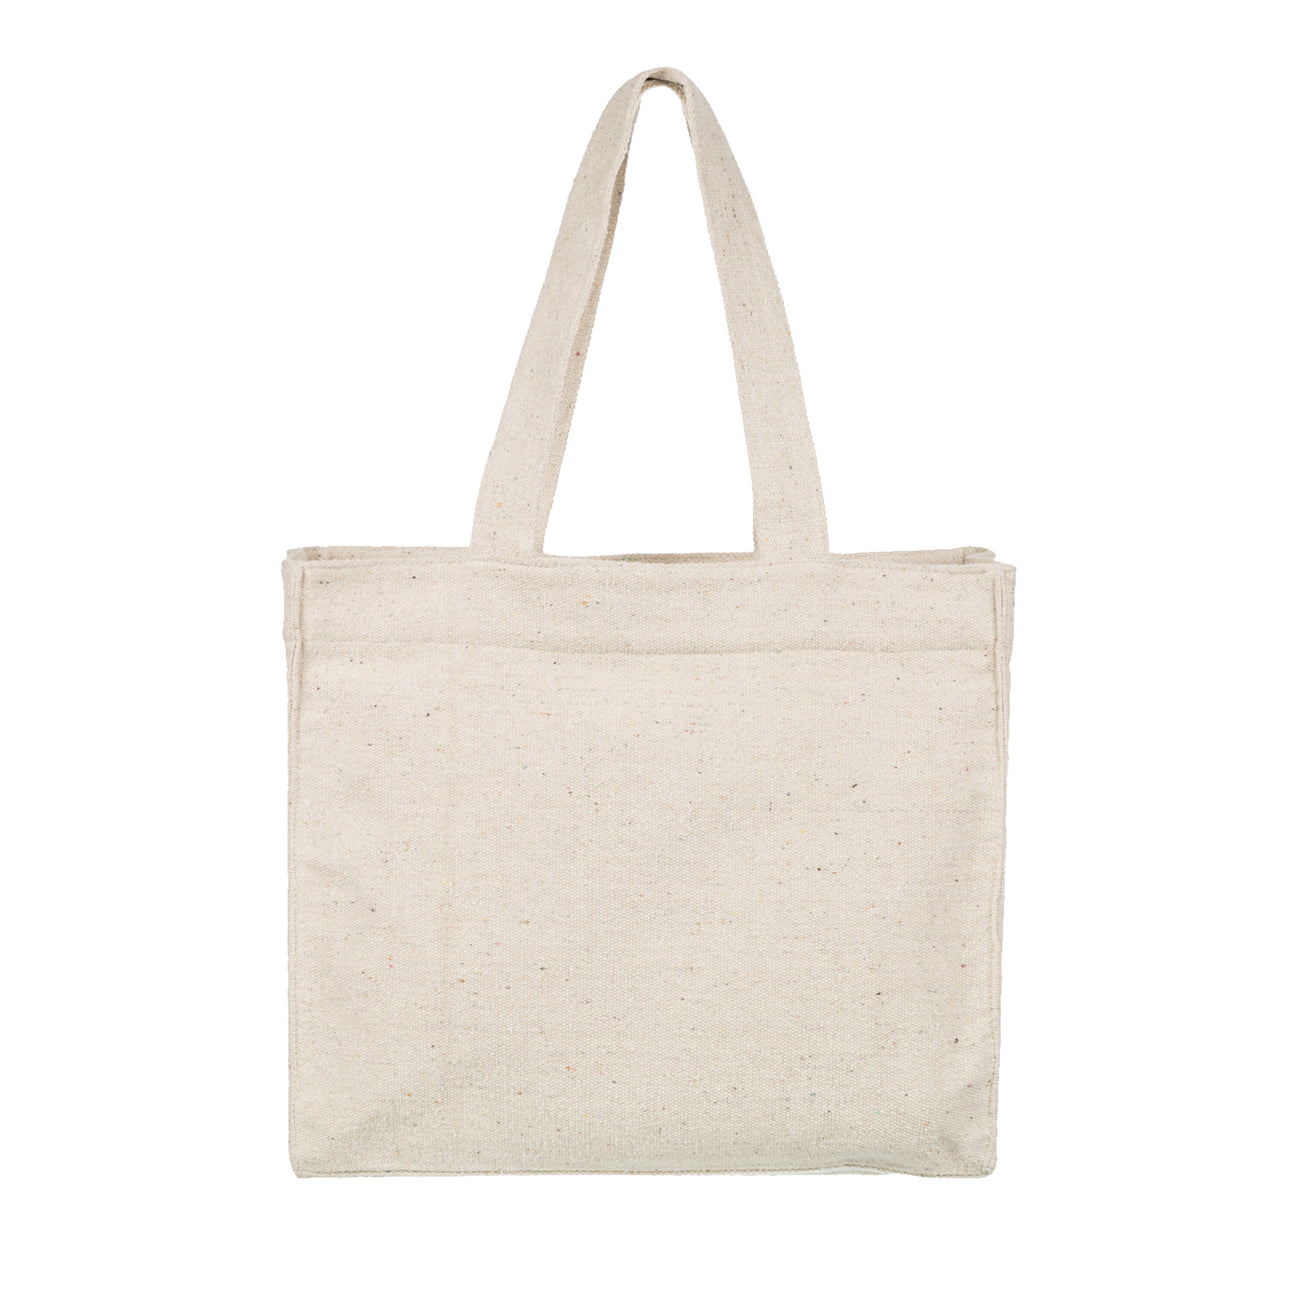 Roxy | Tote Bag Drink The Wave